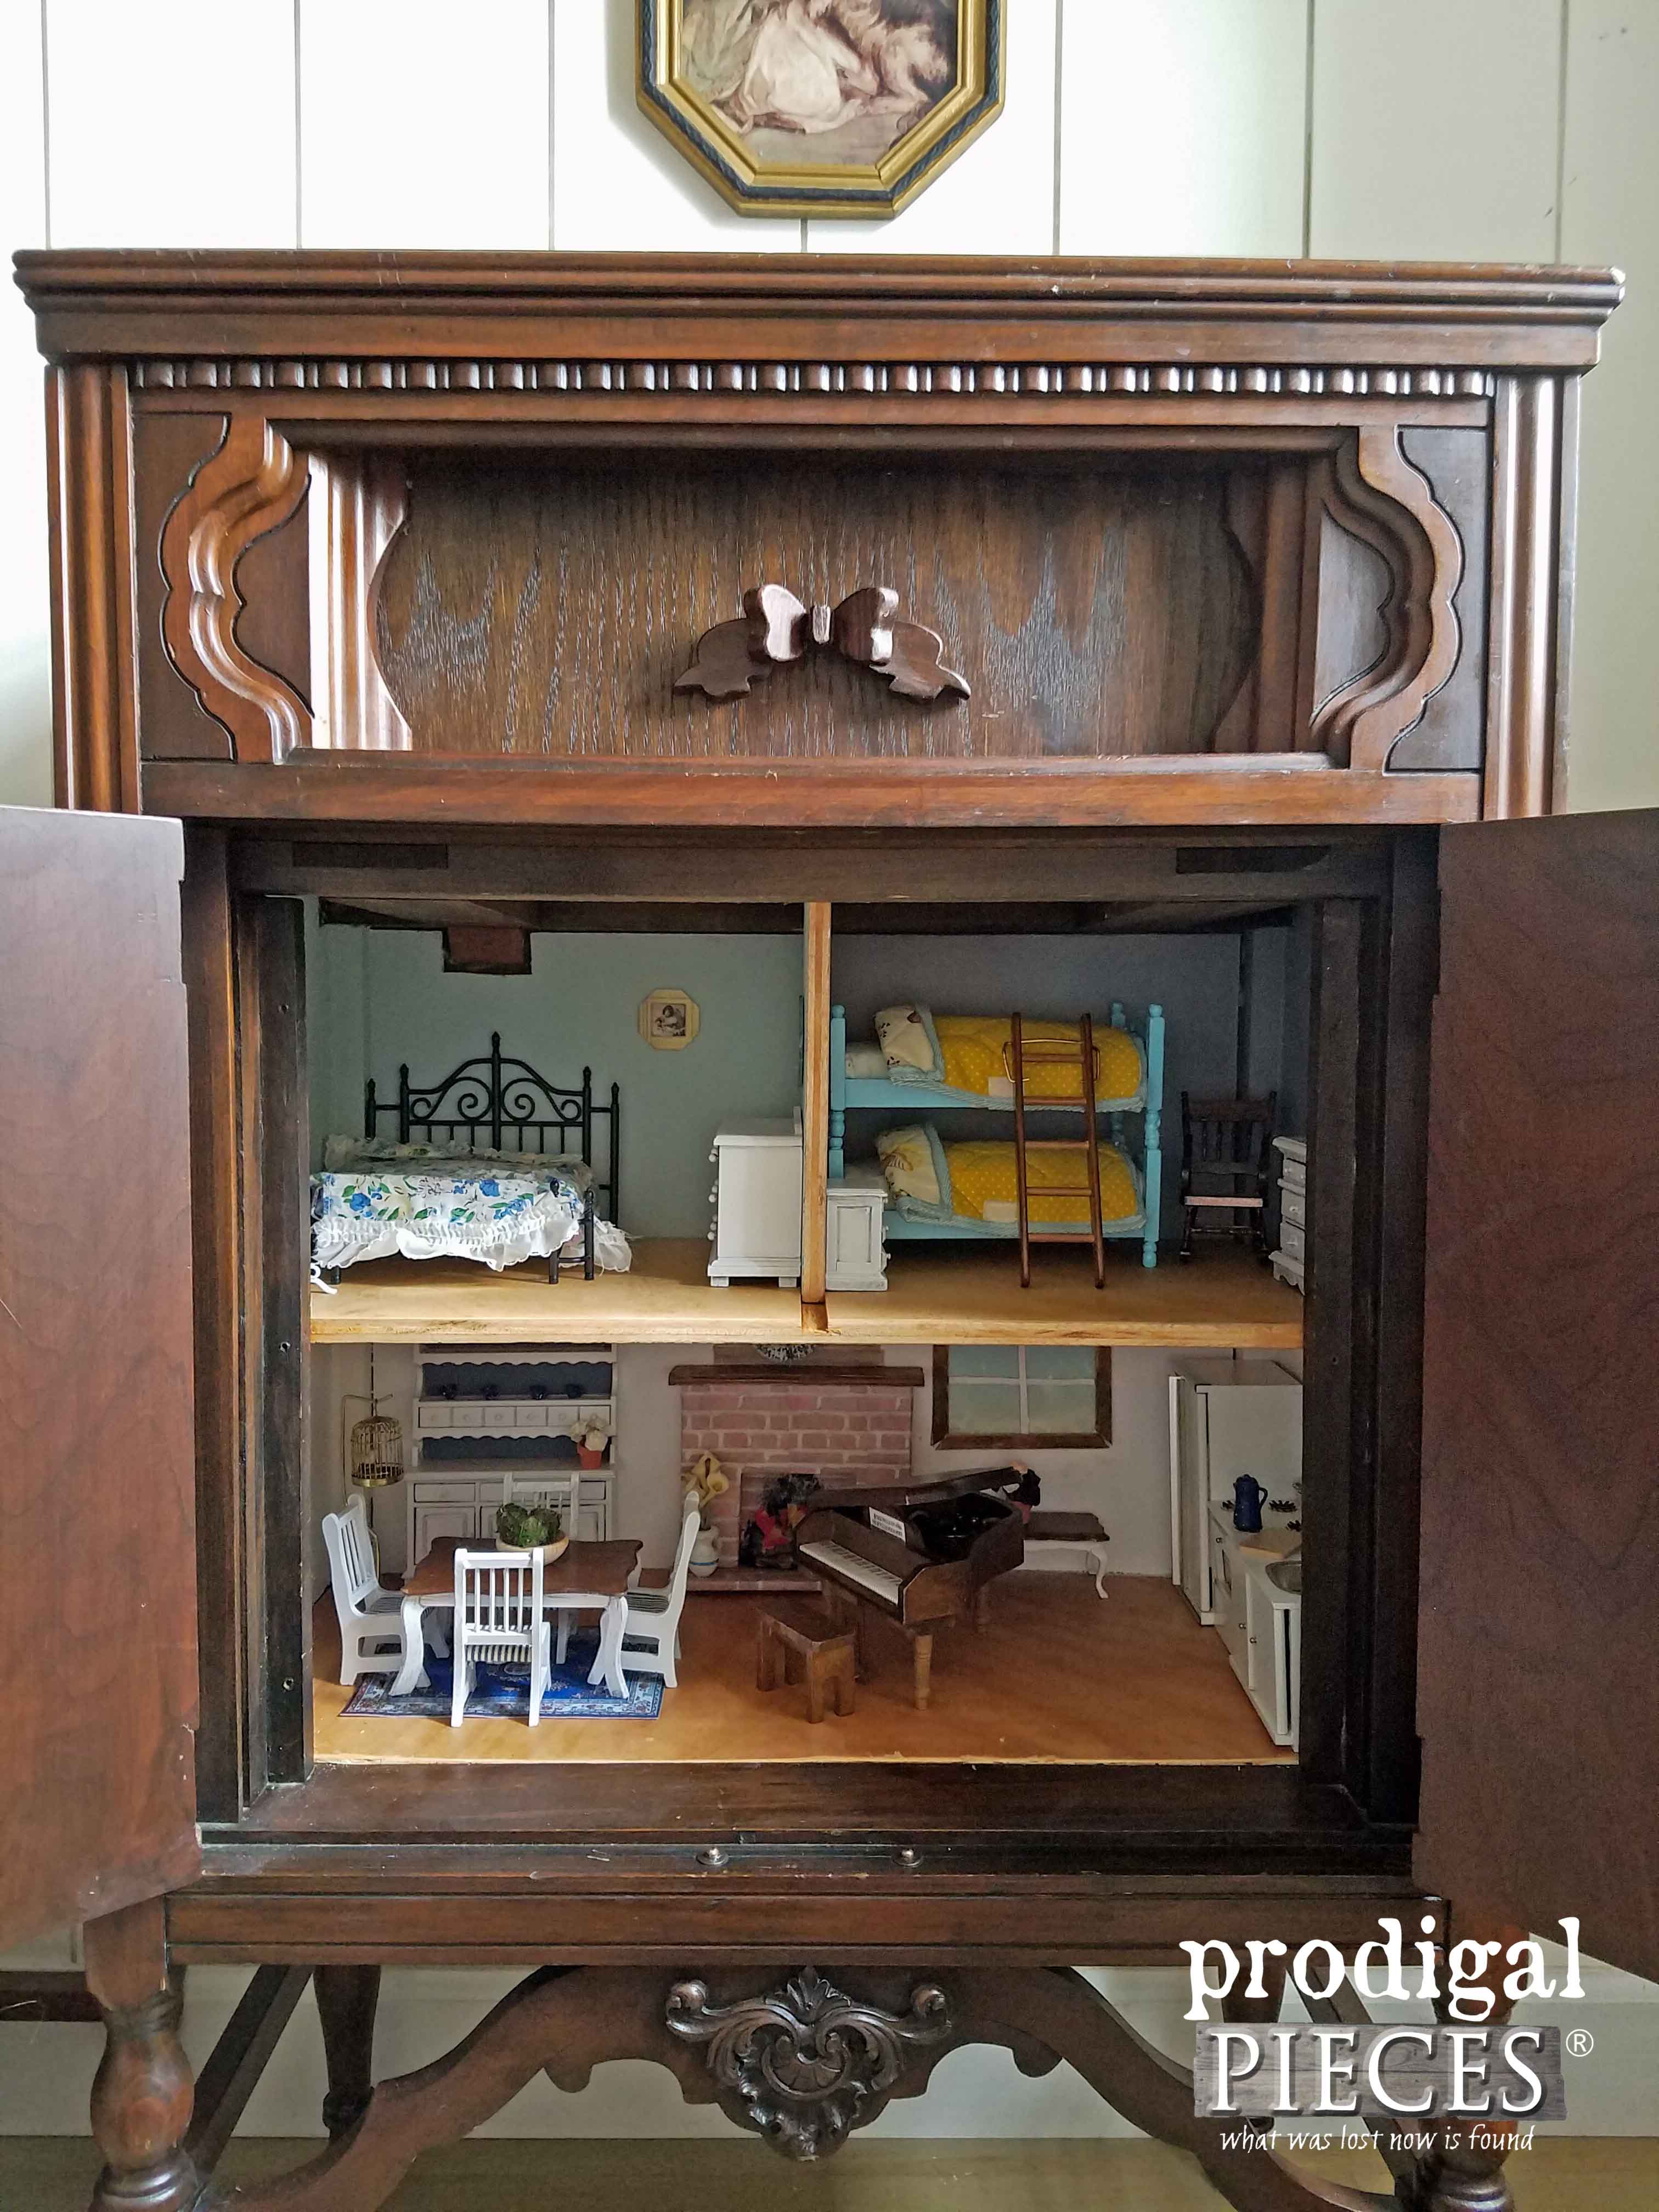 Antique Radio Cabinet Upcycled into Dollhouse by Prodigal Pieces | prodigalpieces.com